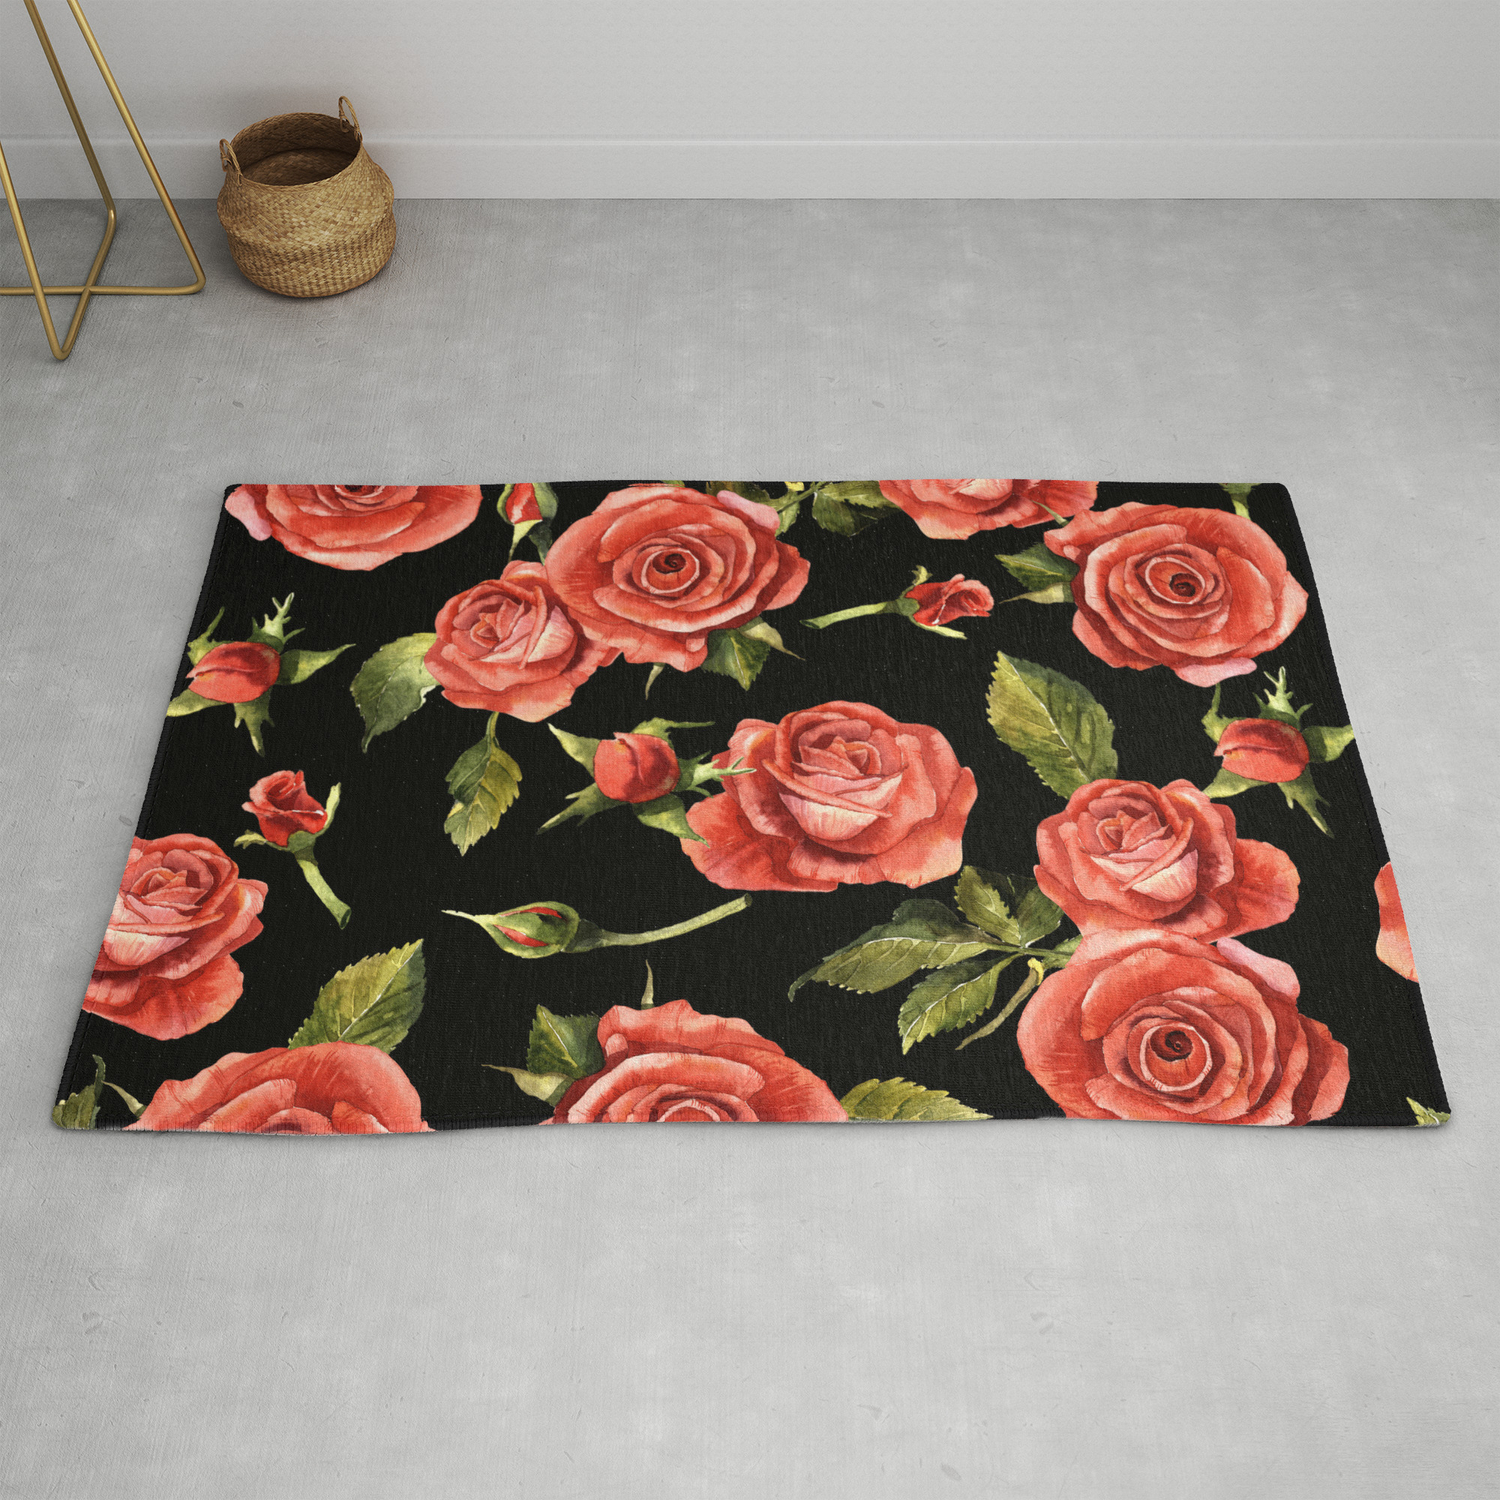 Vintage Red Roses On Black Rug By, Rugs With Roses On Them